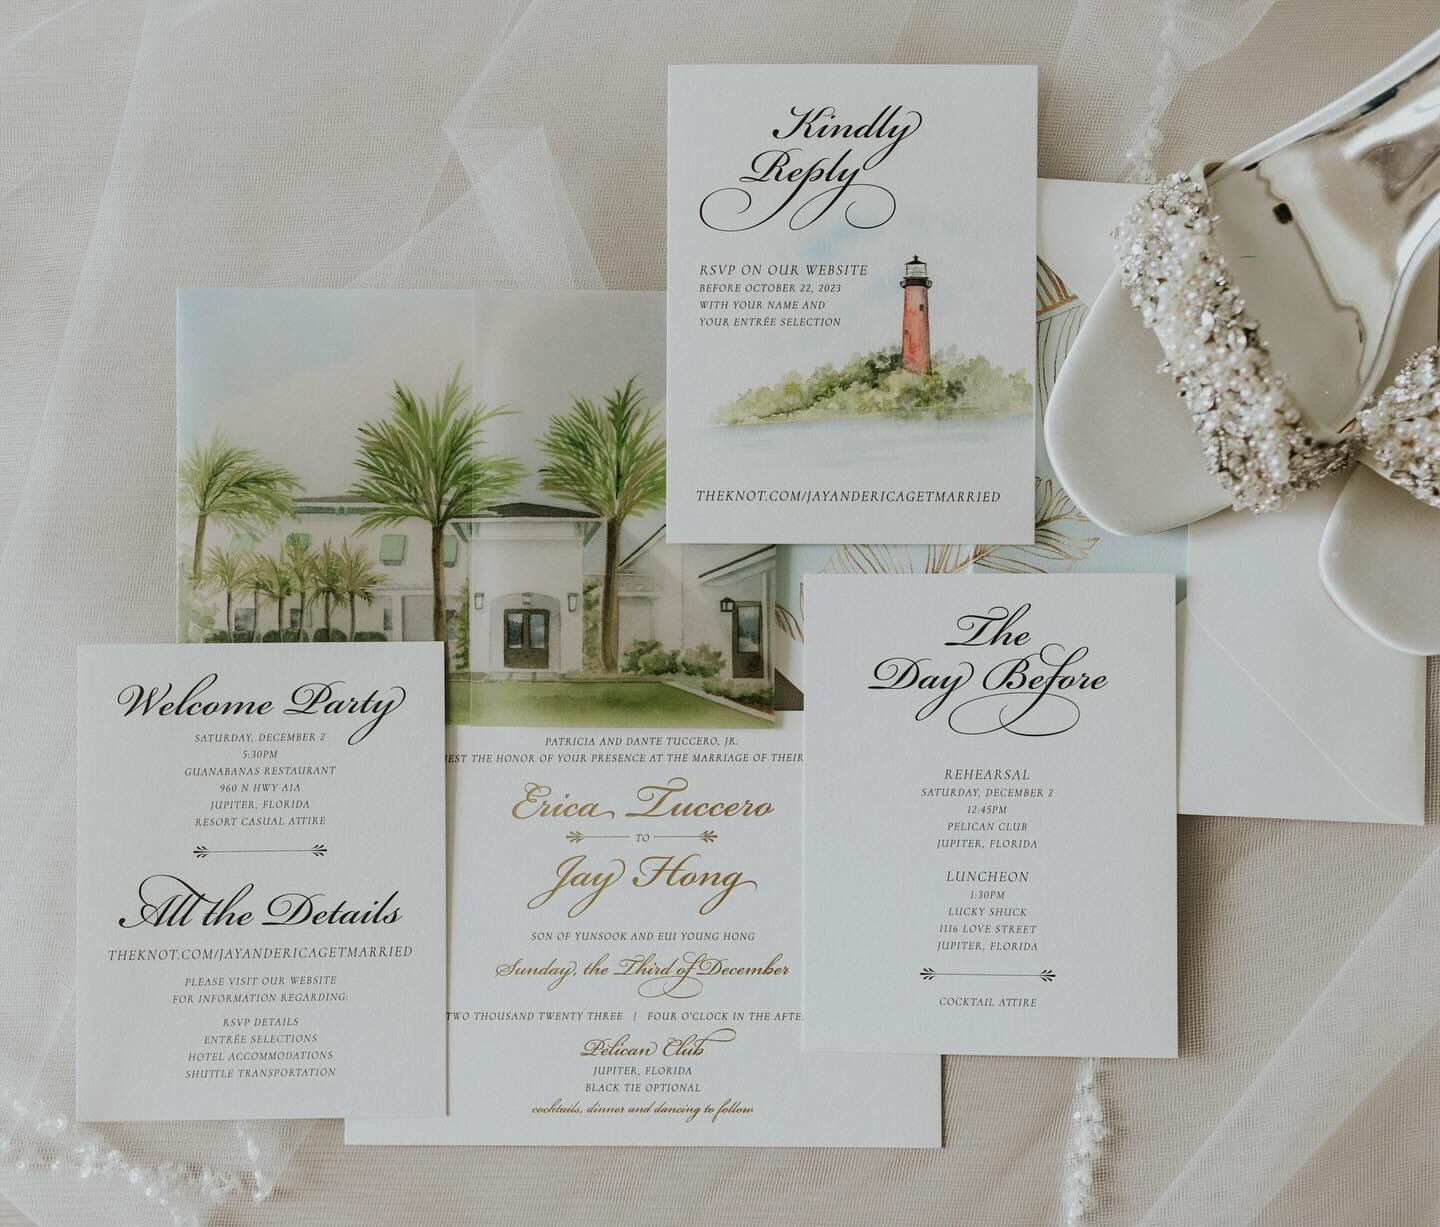 I have been waiting a long time to share this suite! 🌴🩵 Florida December Wedding with gold foil, watercolor vellum wrap and rsvp cards (collab with @thelighthousesketchbook again!) made this suite come to life!! Shout out to #sunderlandprinting for